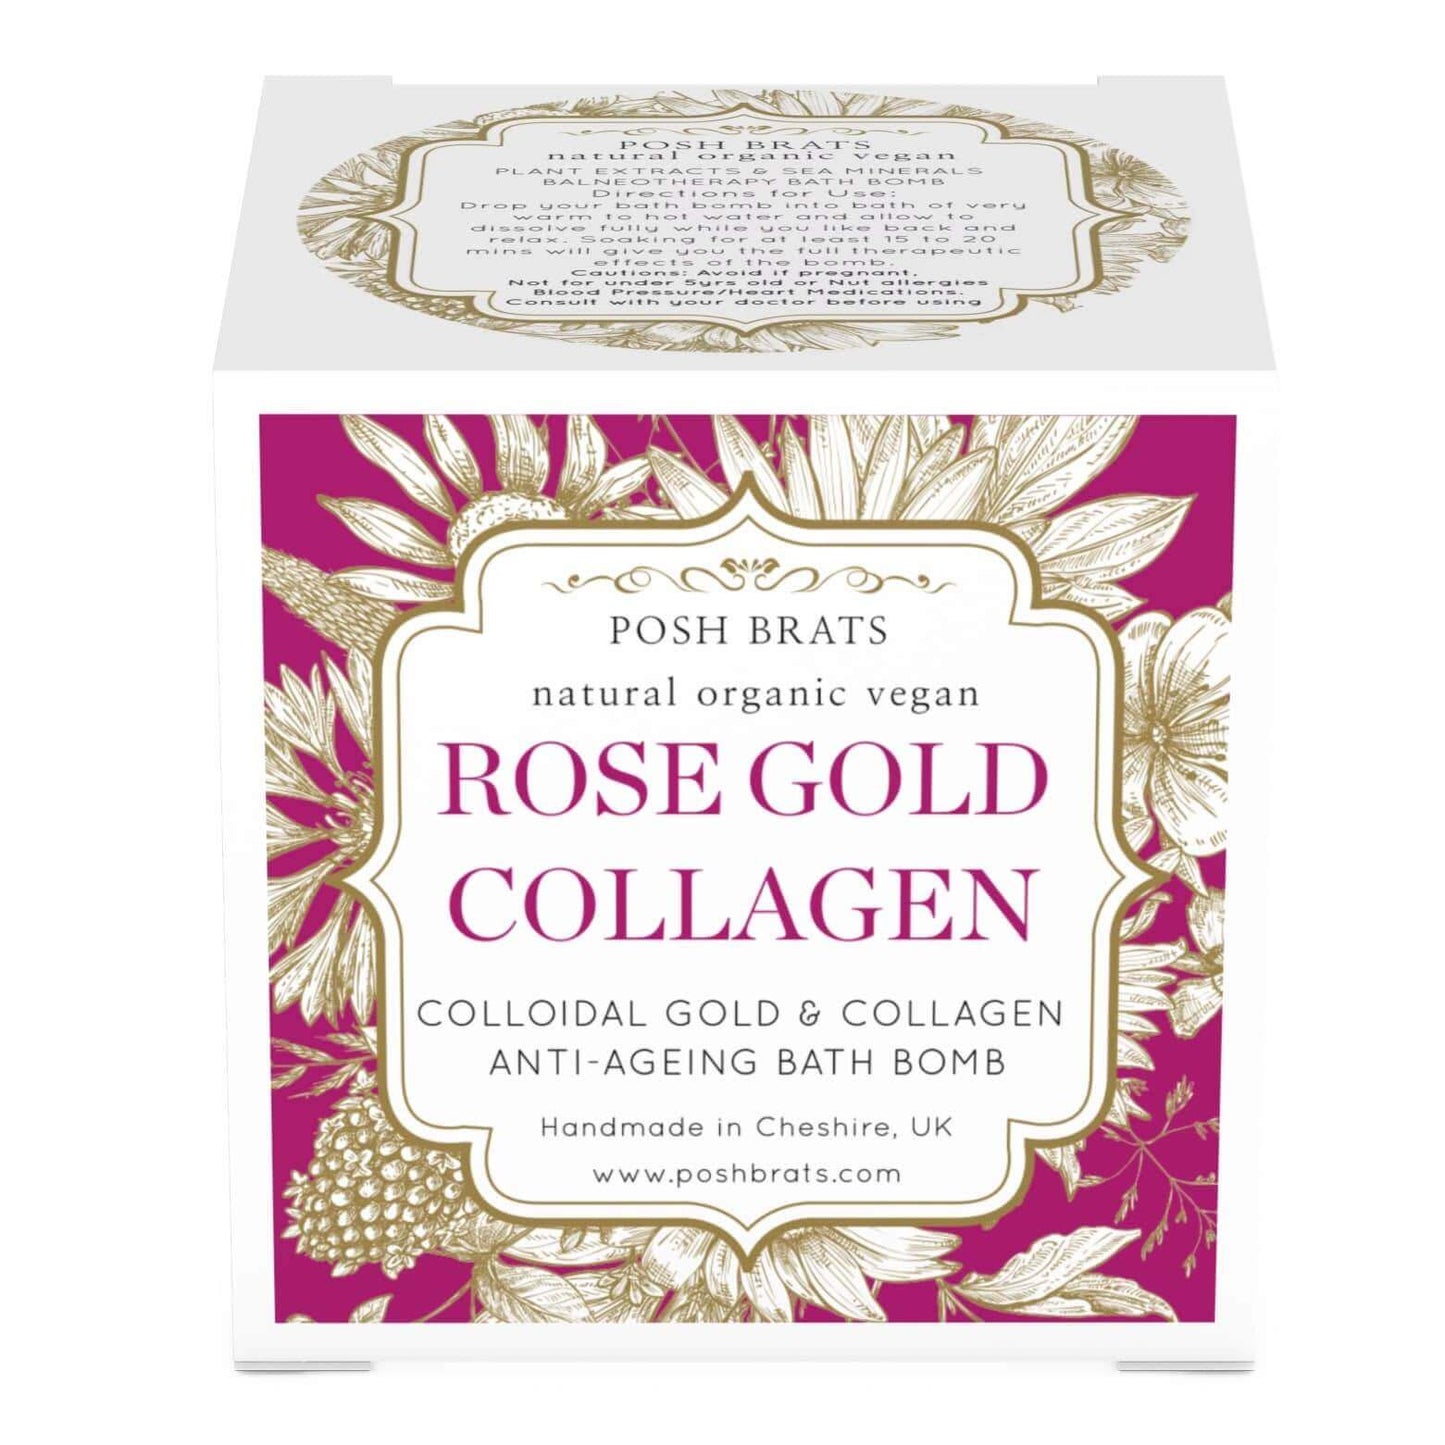 Pamper yourself with the ultimate indulgence, the Rose Gold Collagen Aromatherapy Bath Bomb.